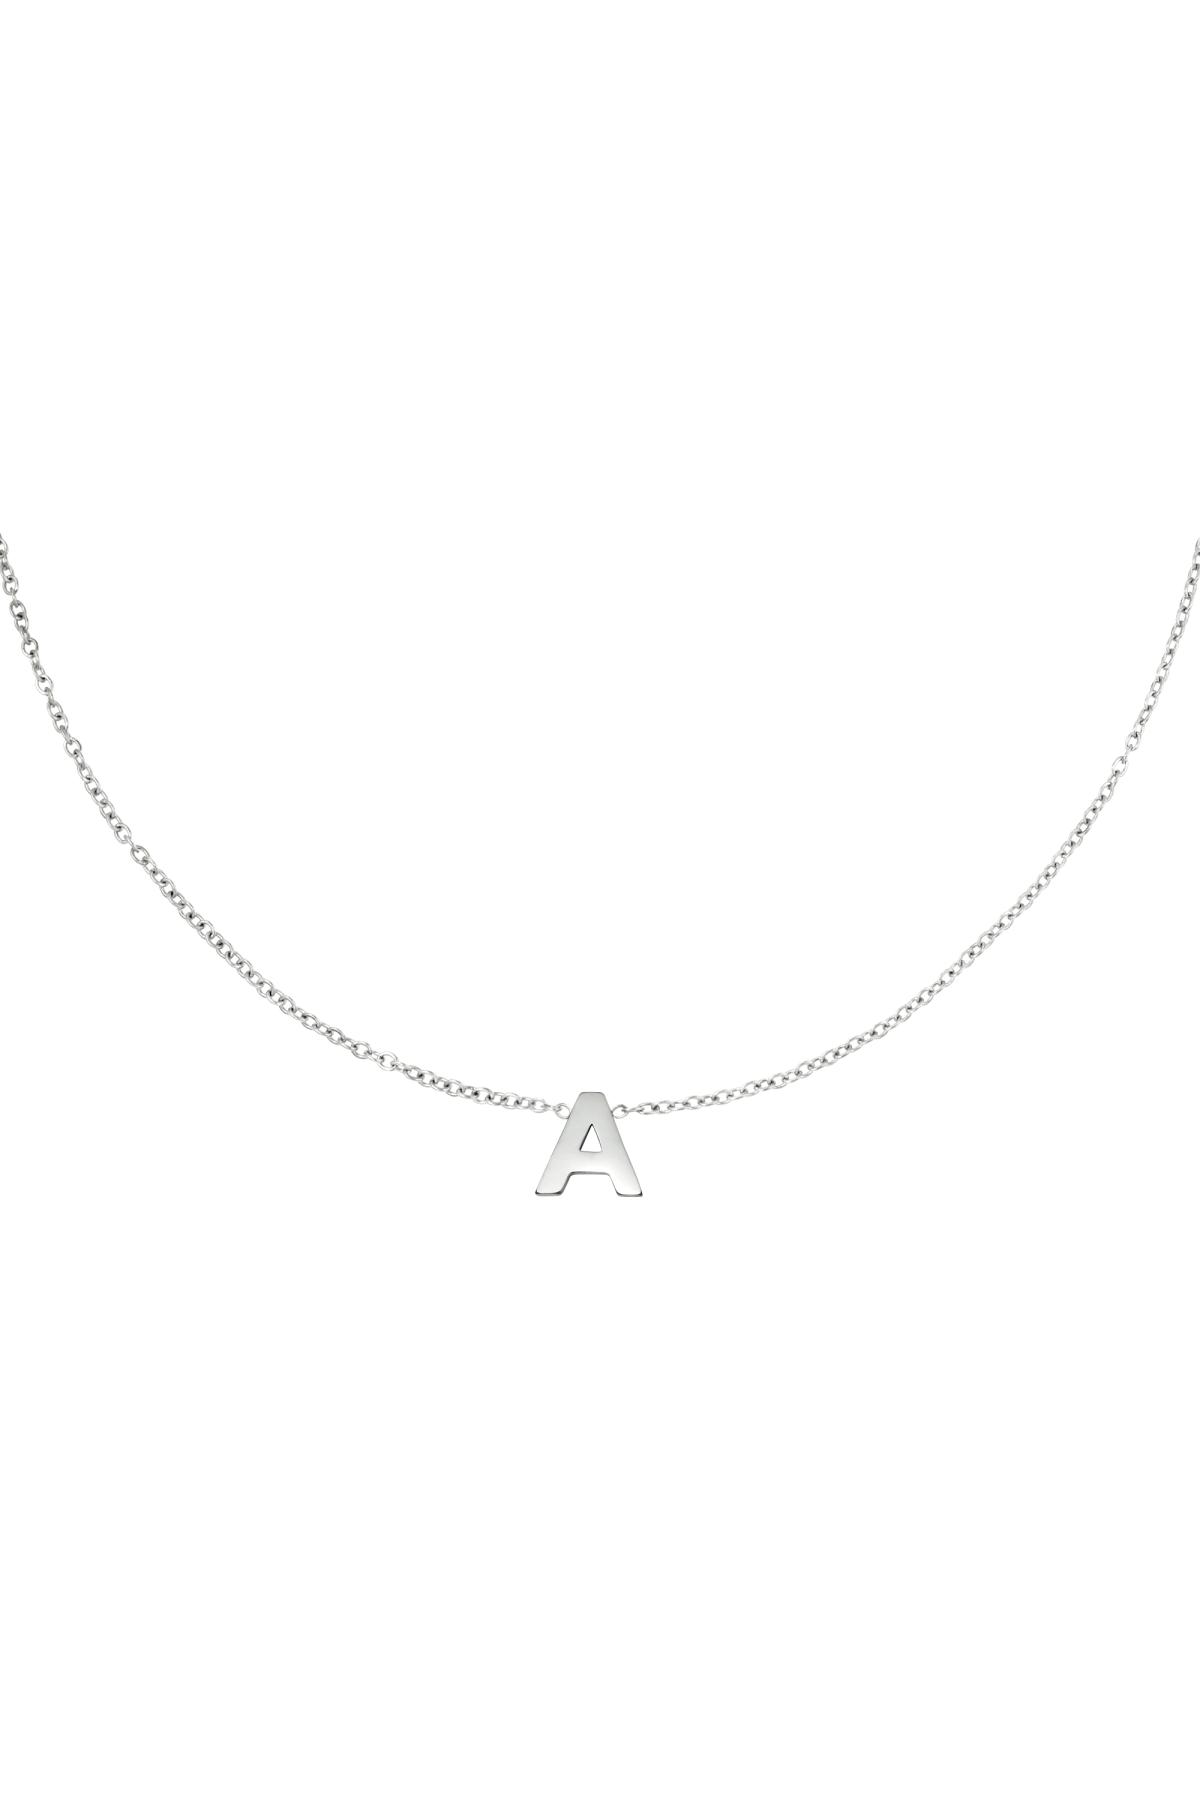 Silver / Stainless steel necklace initial A Silver 